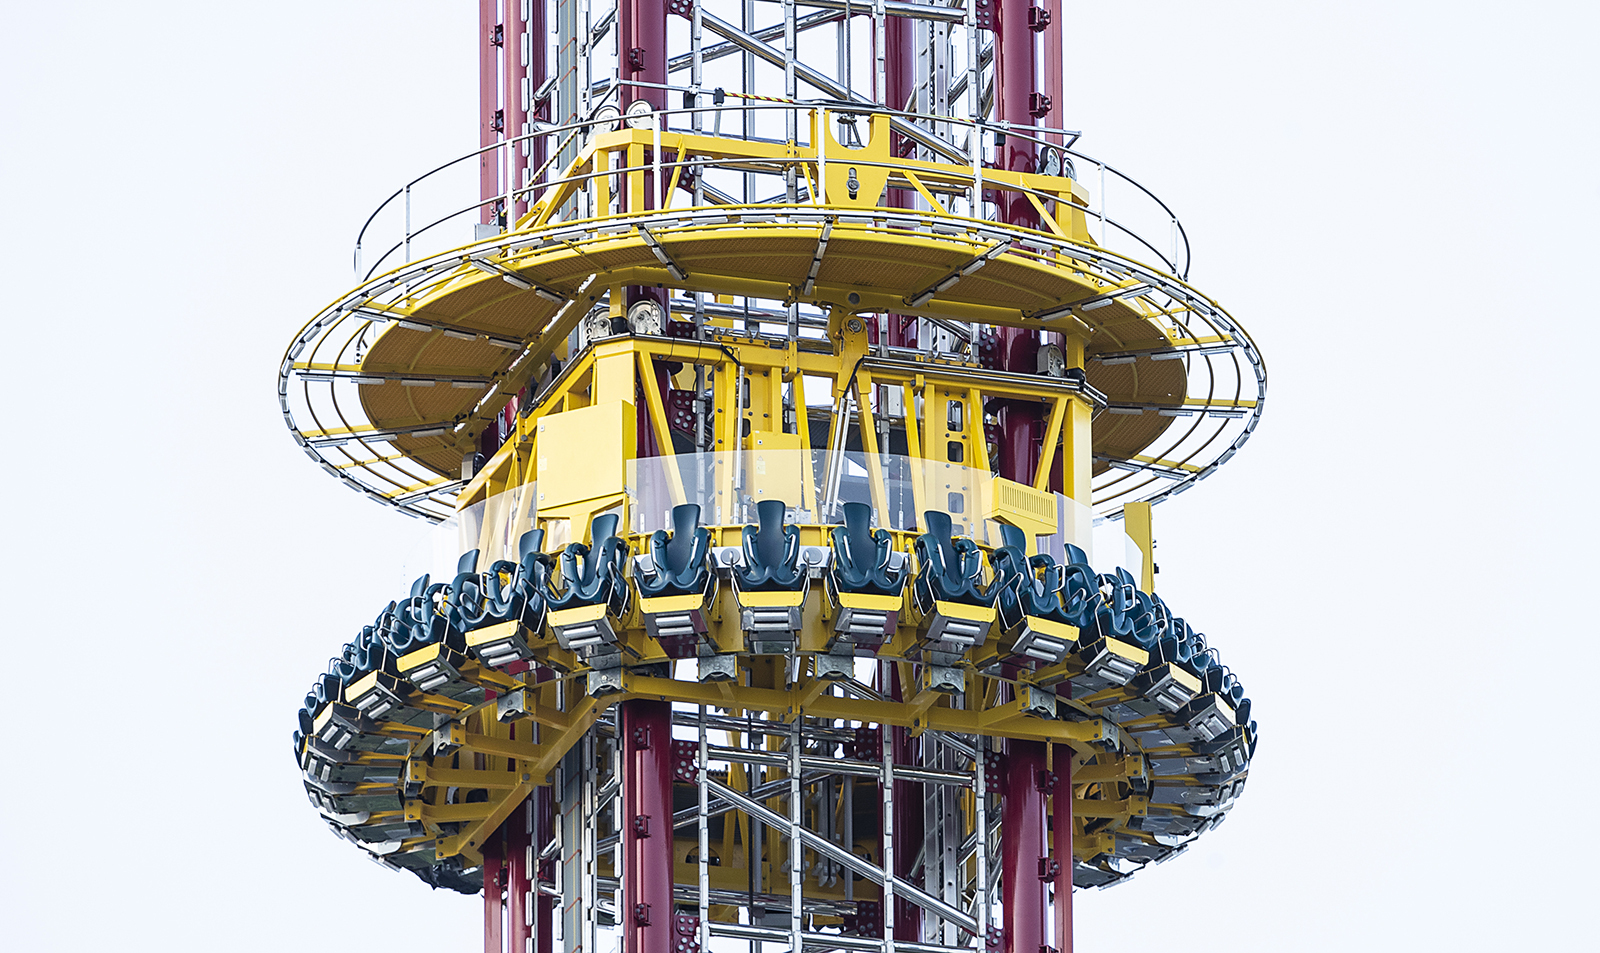 Seats on Florida Amusement Park Ride Was Manually Adjusted Before 14-Year-Old Boy Fell to His Death